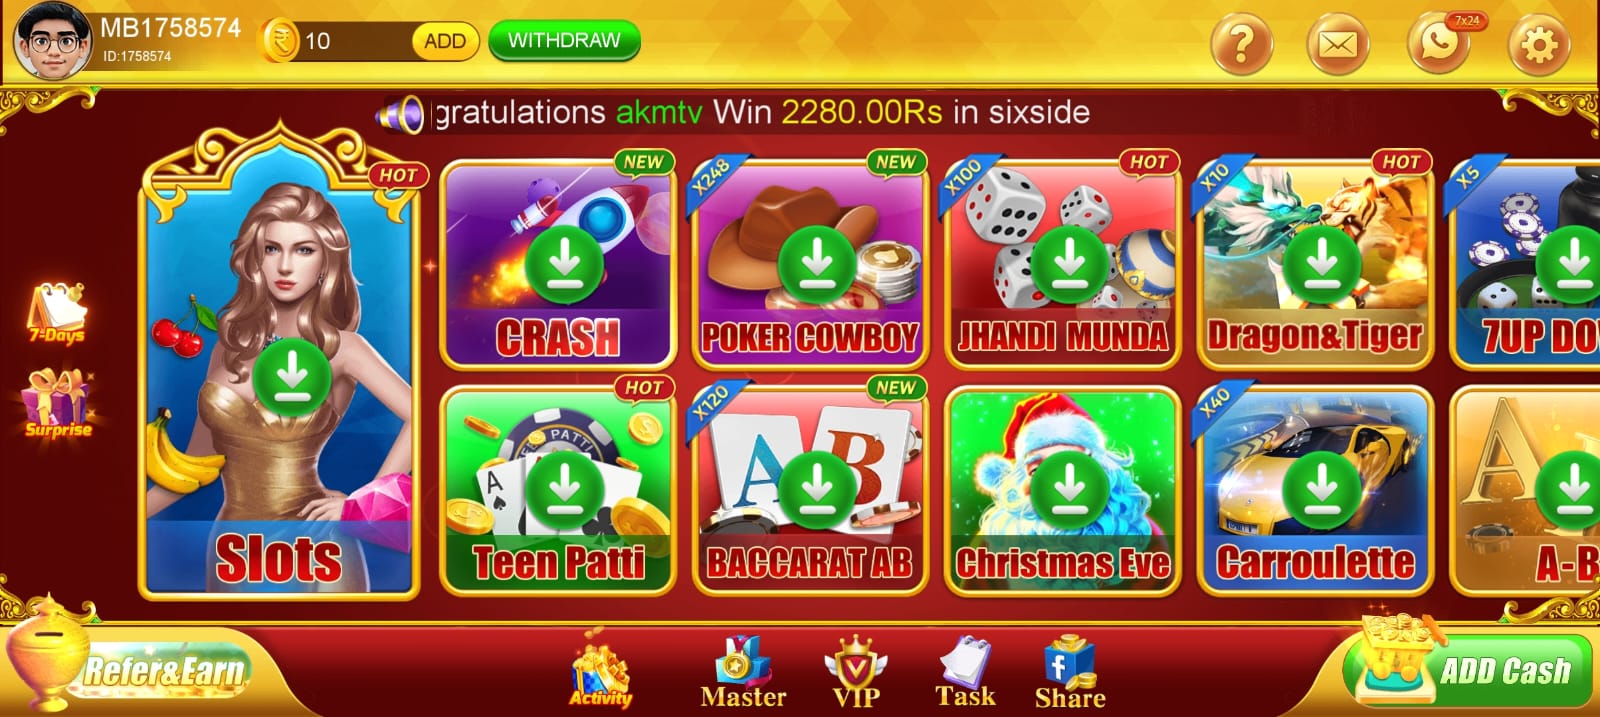 Available All Games on Teen Patti Trip App